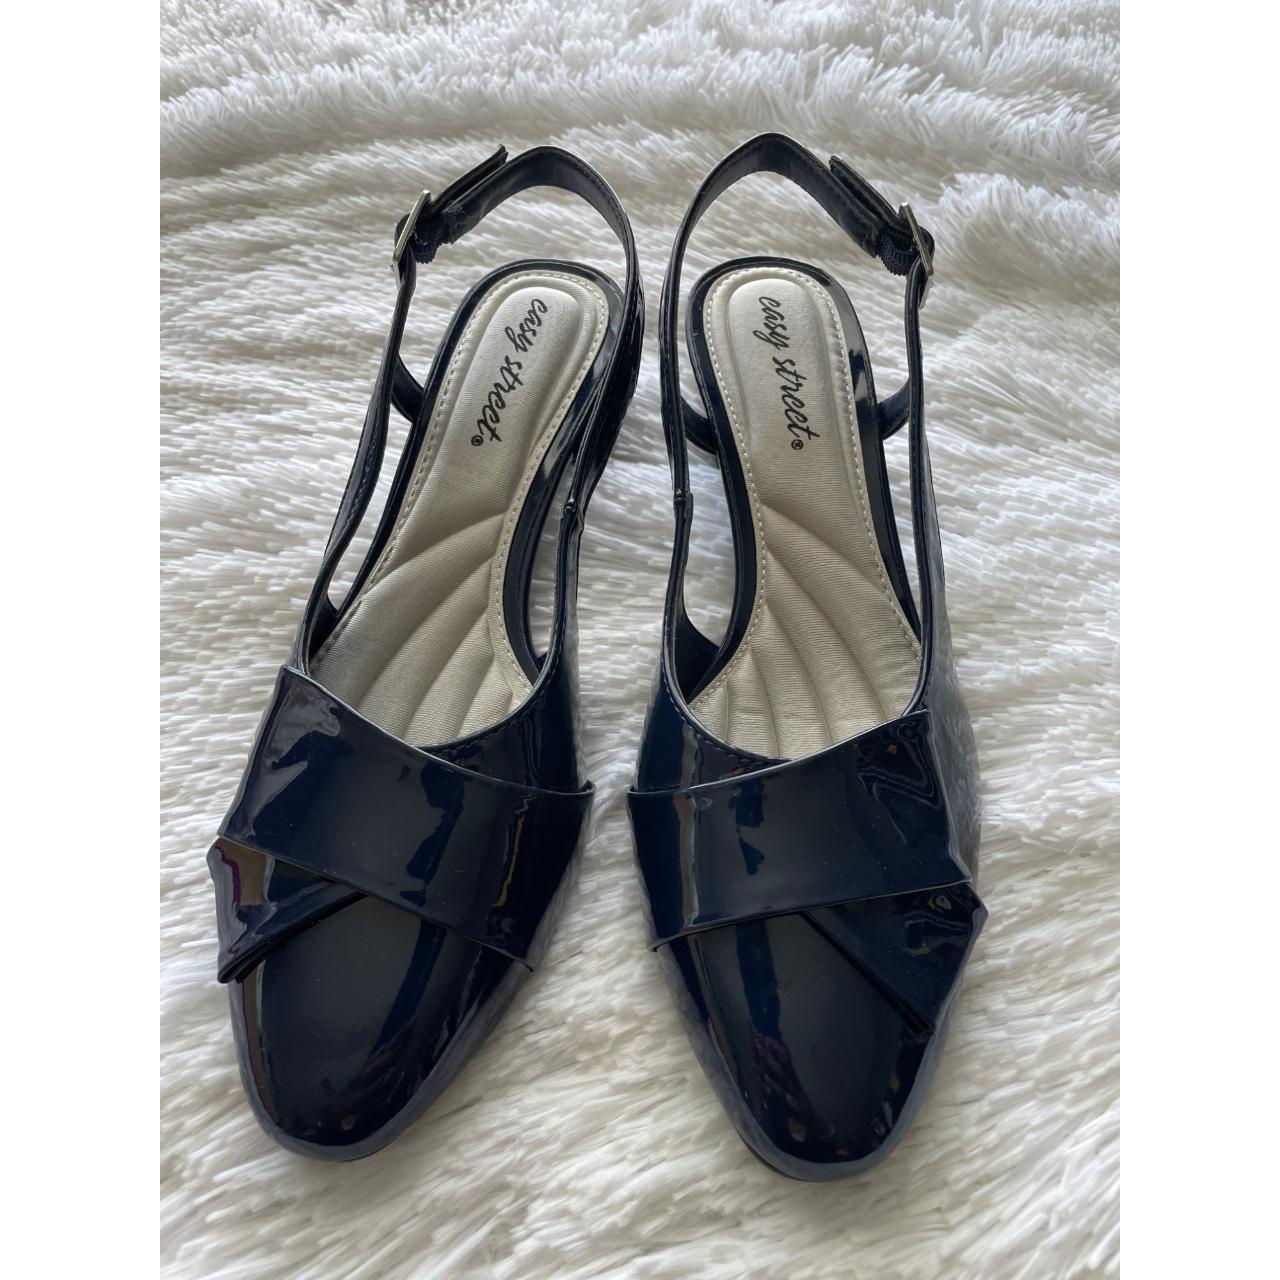 item listed by starlitesfinds